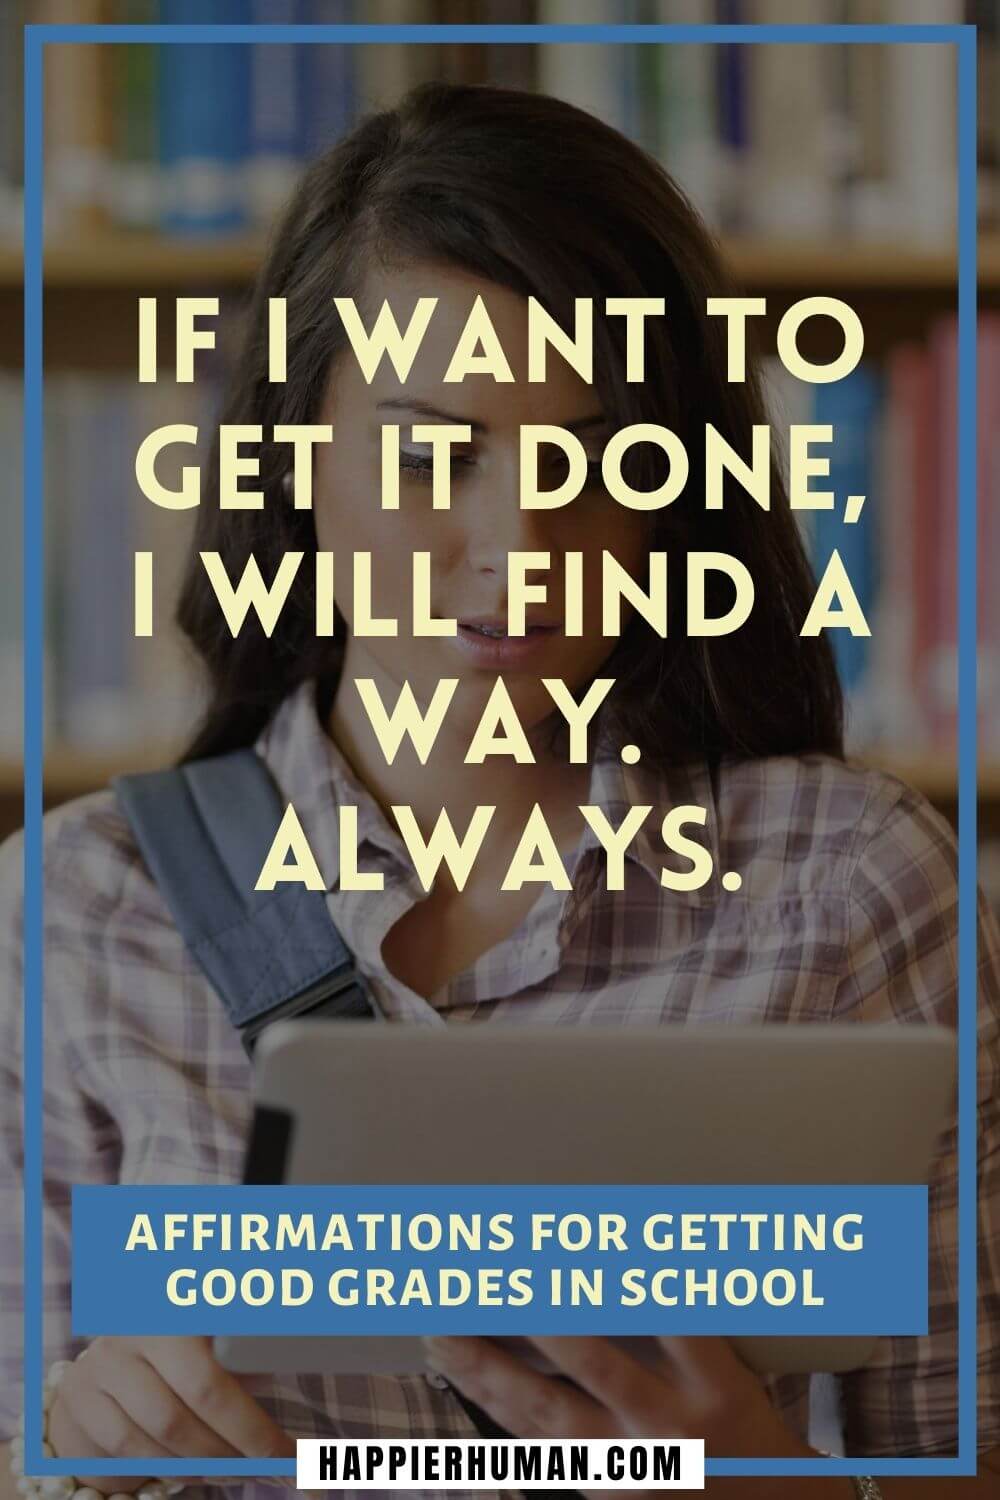 Affirmations for Good Grades - If I want to get it done, I will find a way. Always. | how to manifest good grades fast | ace exams affirmations | law of attraction affirmations for students